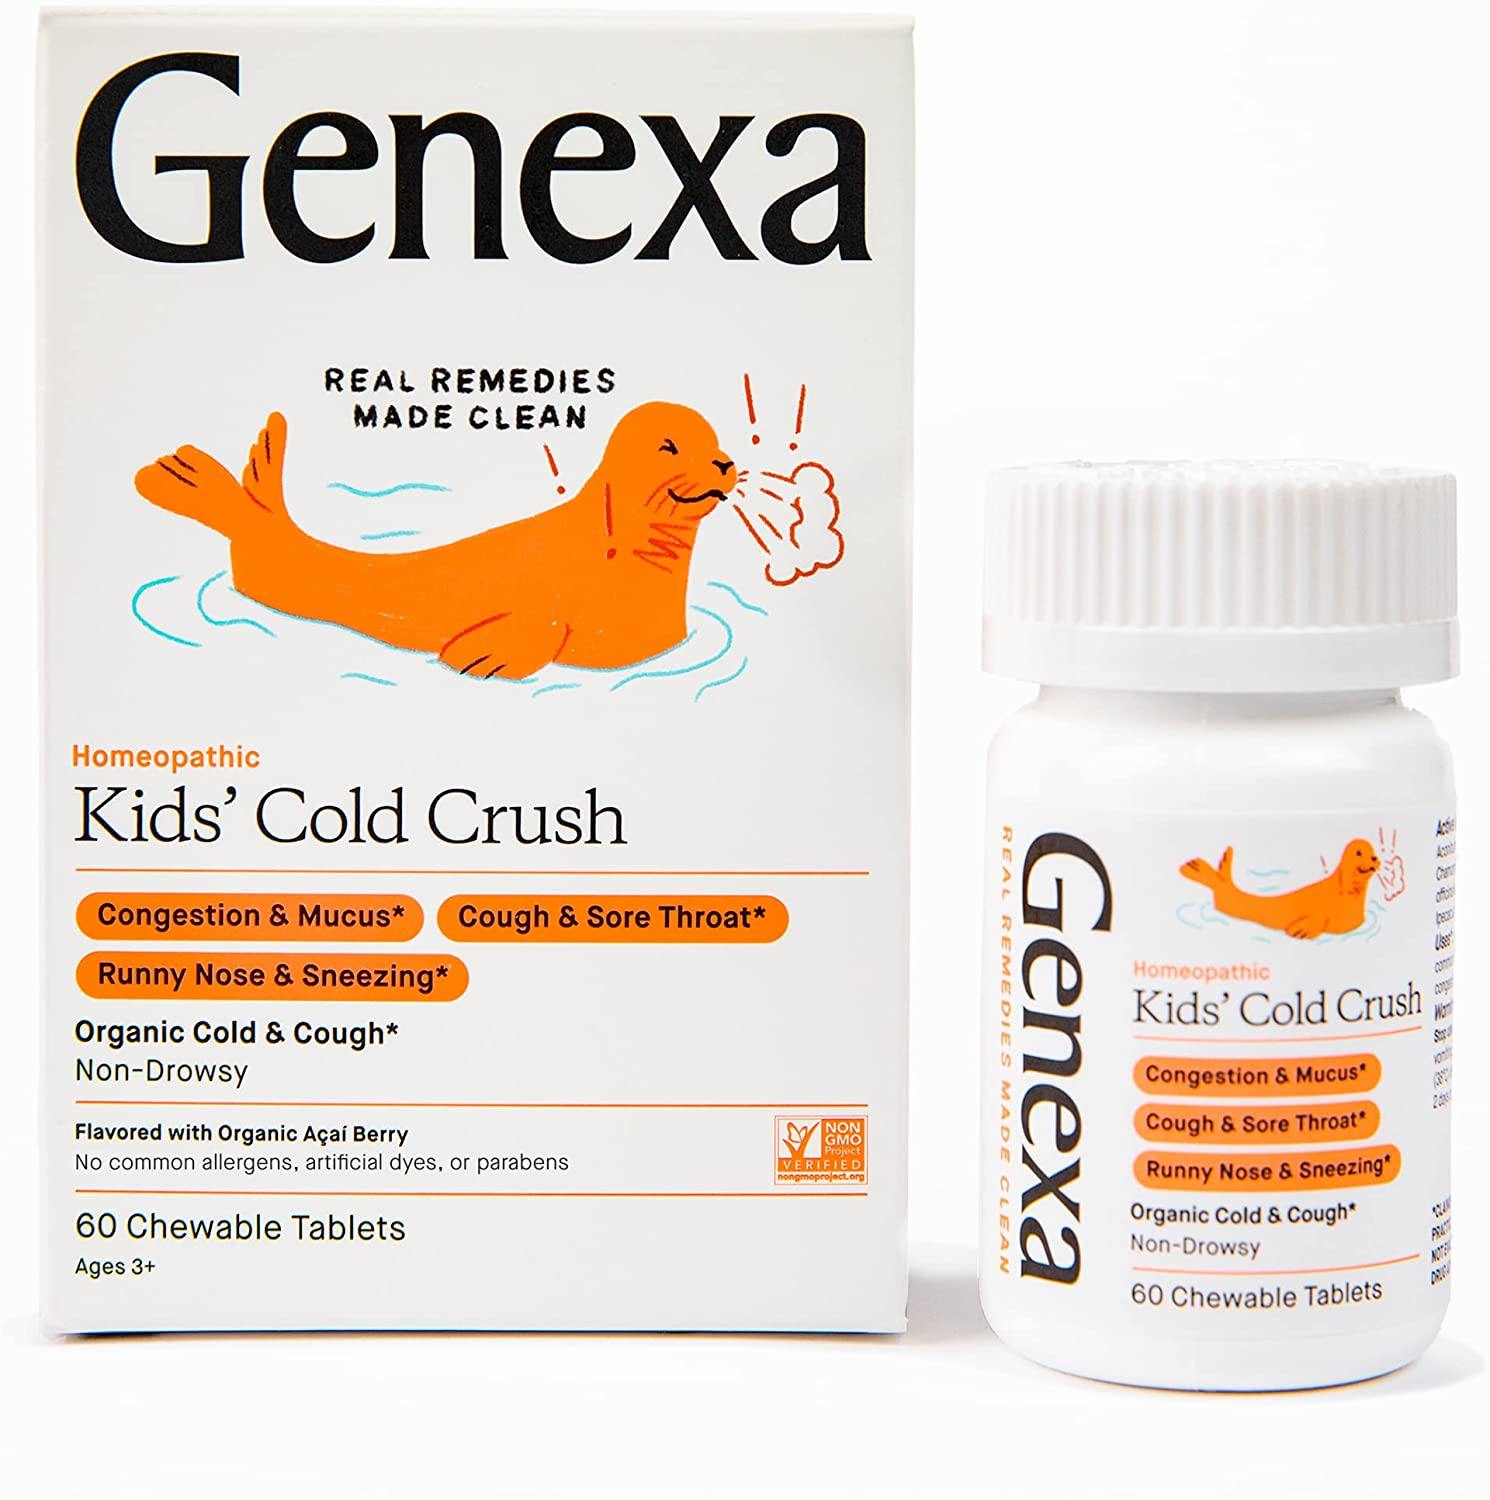 Kids' Cold Crush - 180 Tablets (3Pk) - Multi-Symptom Cough & Cold Remedy for Children - Certified Vegan, Organic, Gluten Free & Non-Gmo - Homeopathic Remedies